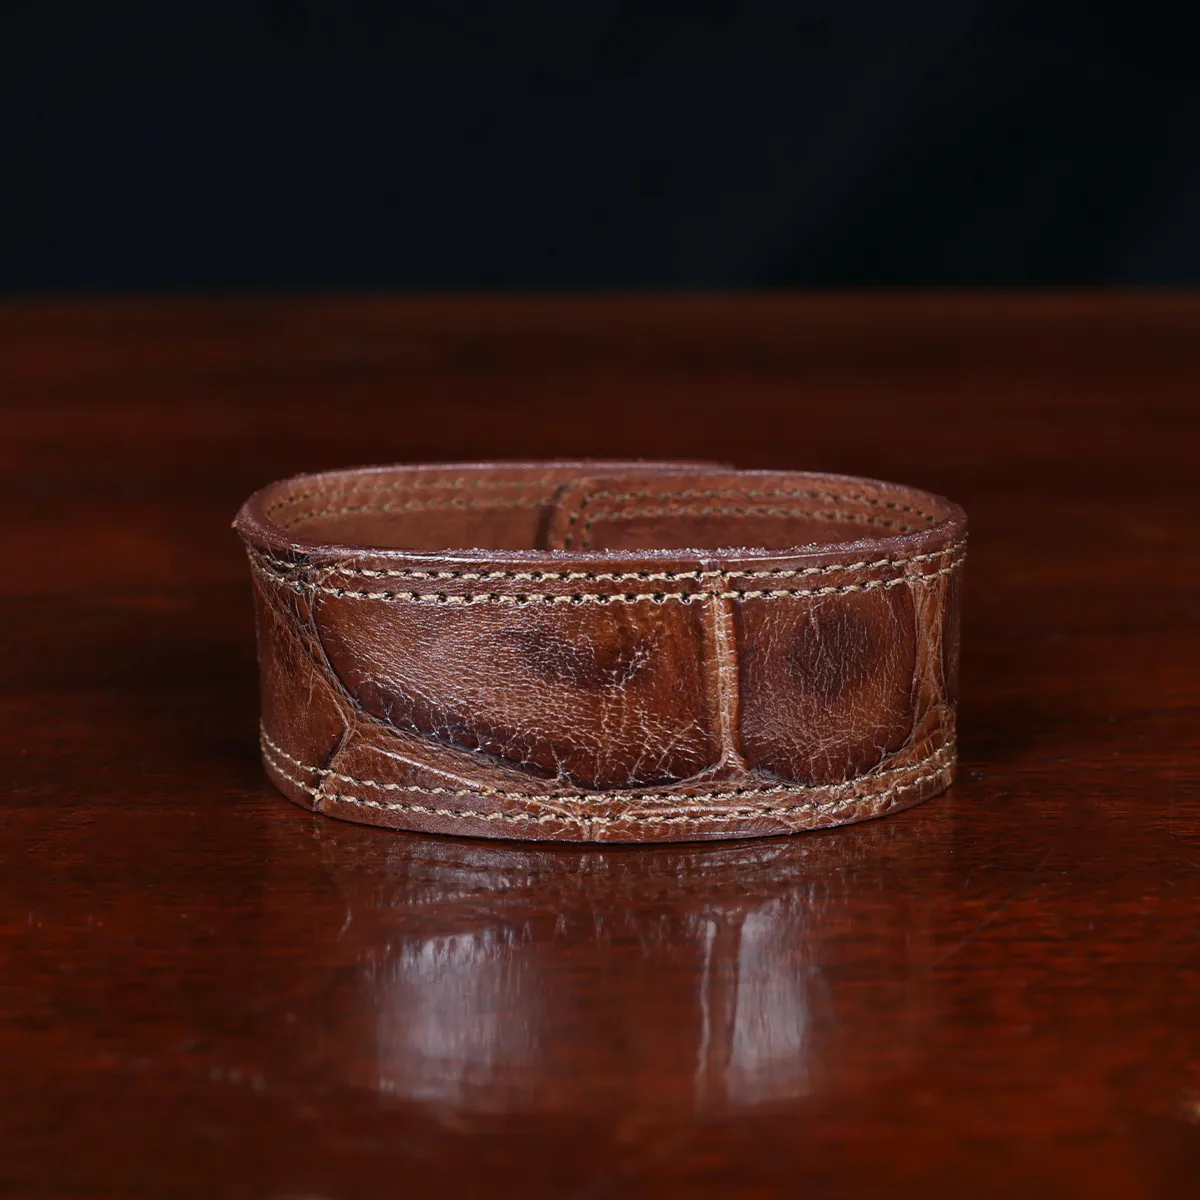 cuff-bracelet-alligator-no28-front view- on a wooden table with a dark background